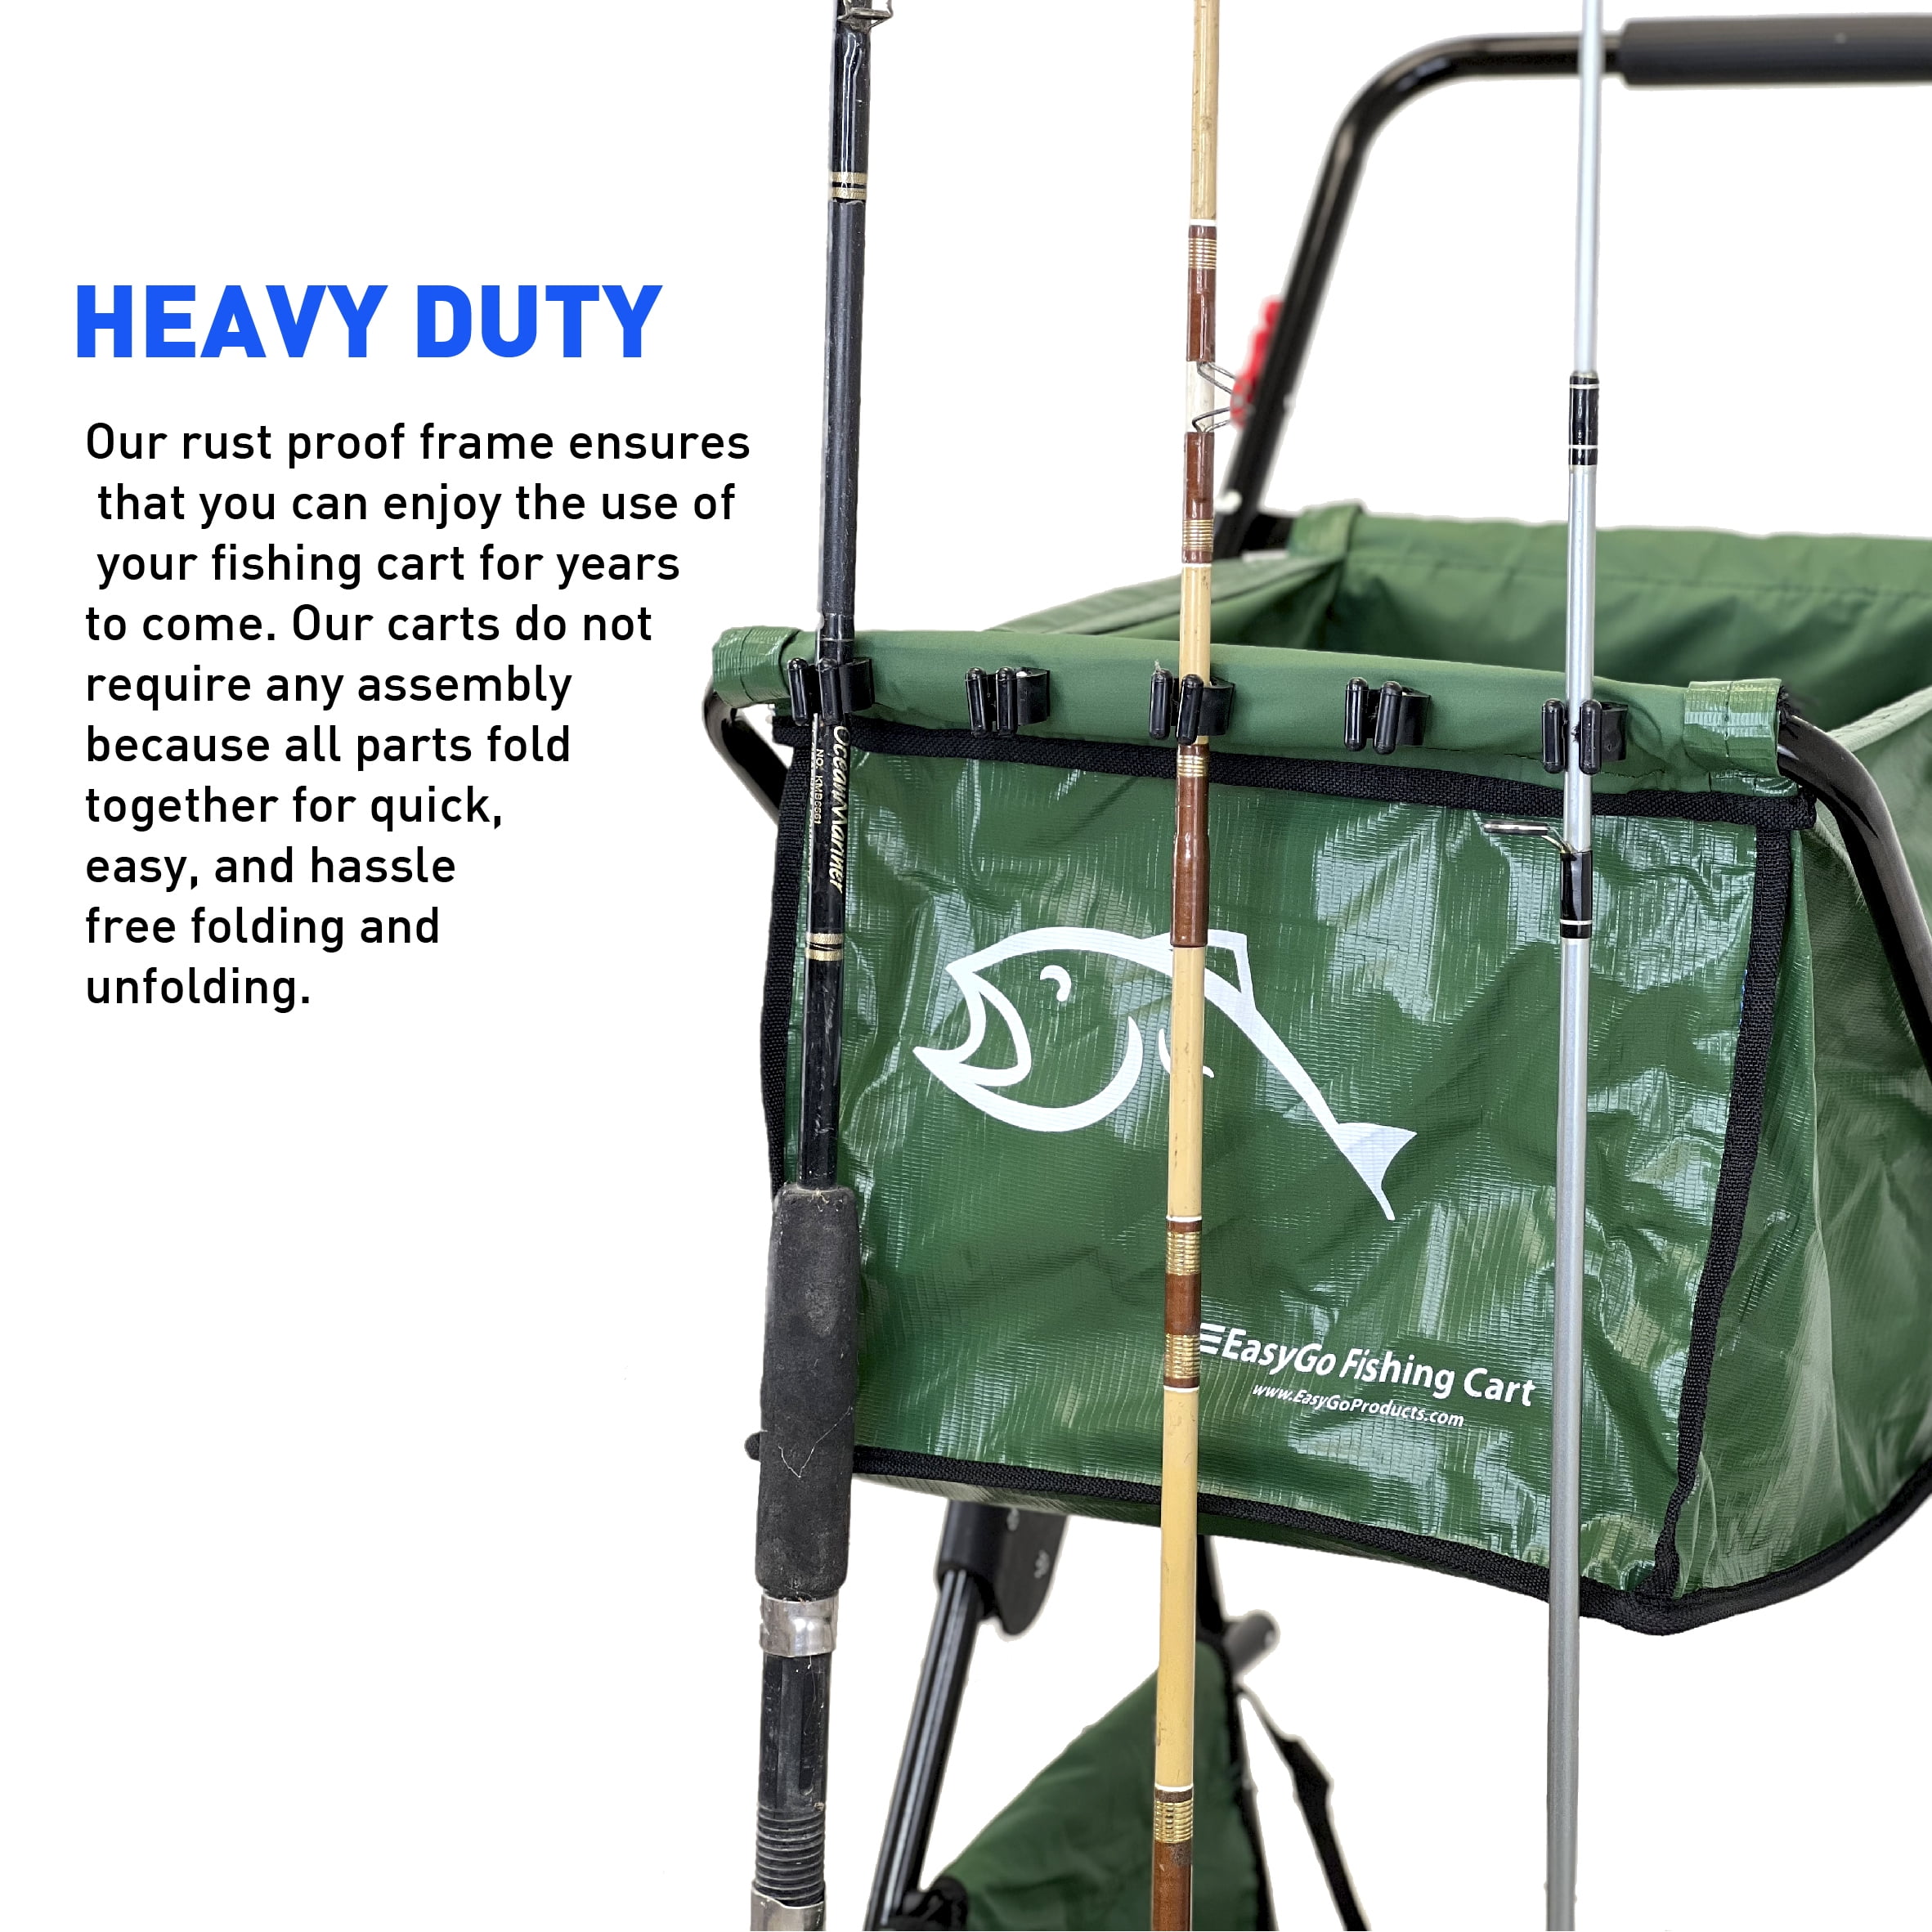 Fishing Chair with Rod Holder Built In Cooler Hands Free Fishing Pole Holder  - Storage Pouch Storage Bag for Fishing Accessories Full Size Portable &  Folding Ruler for Measuring Fish 